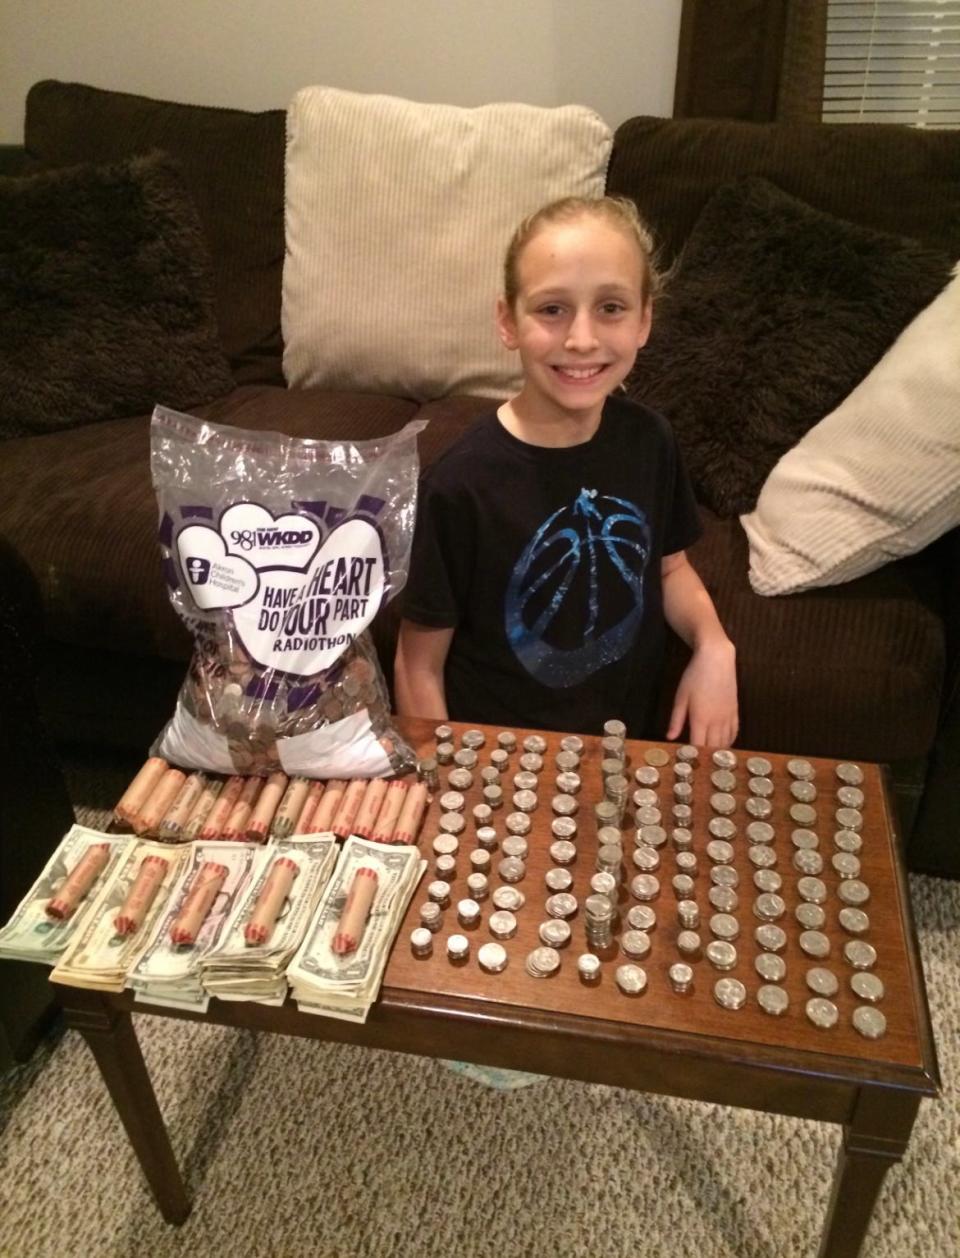 Kenslee Brandon counts some of the $800 she collected from individuals to donate to Akron Children's Hospital during a fundraising campaign. She was treated at the hospital for Type I diabetes.